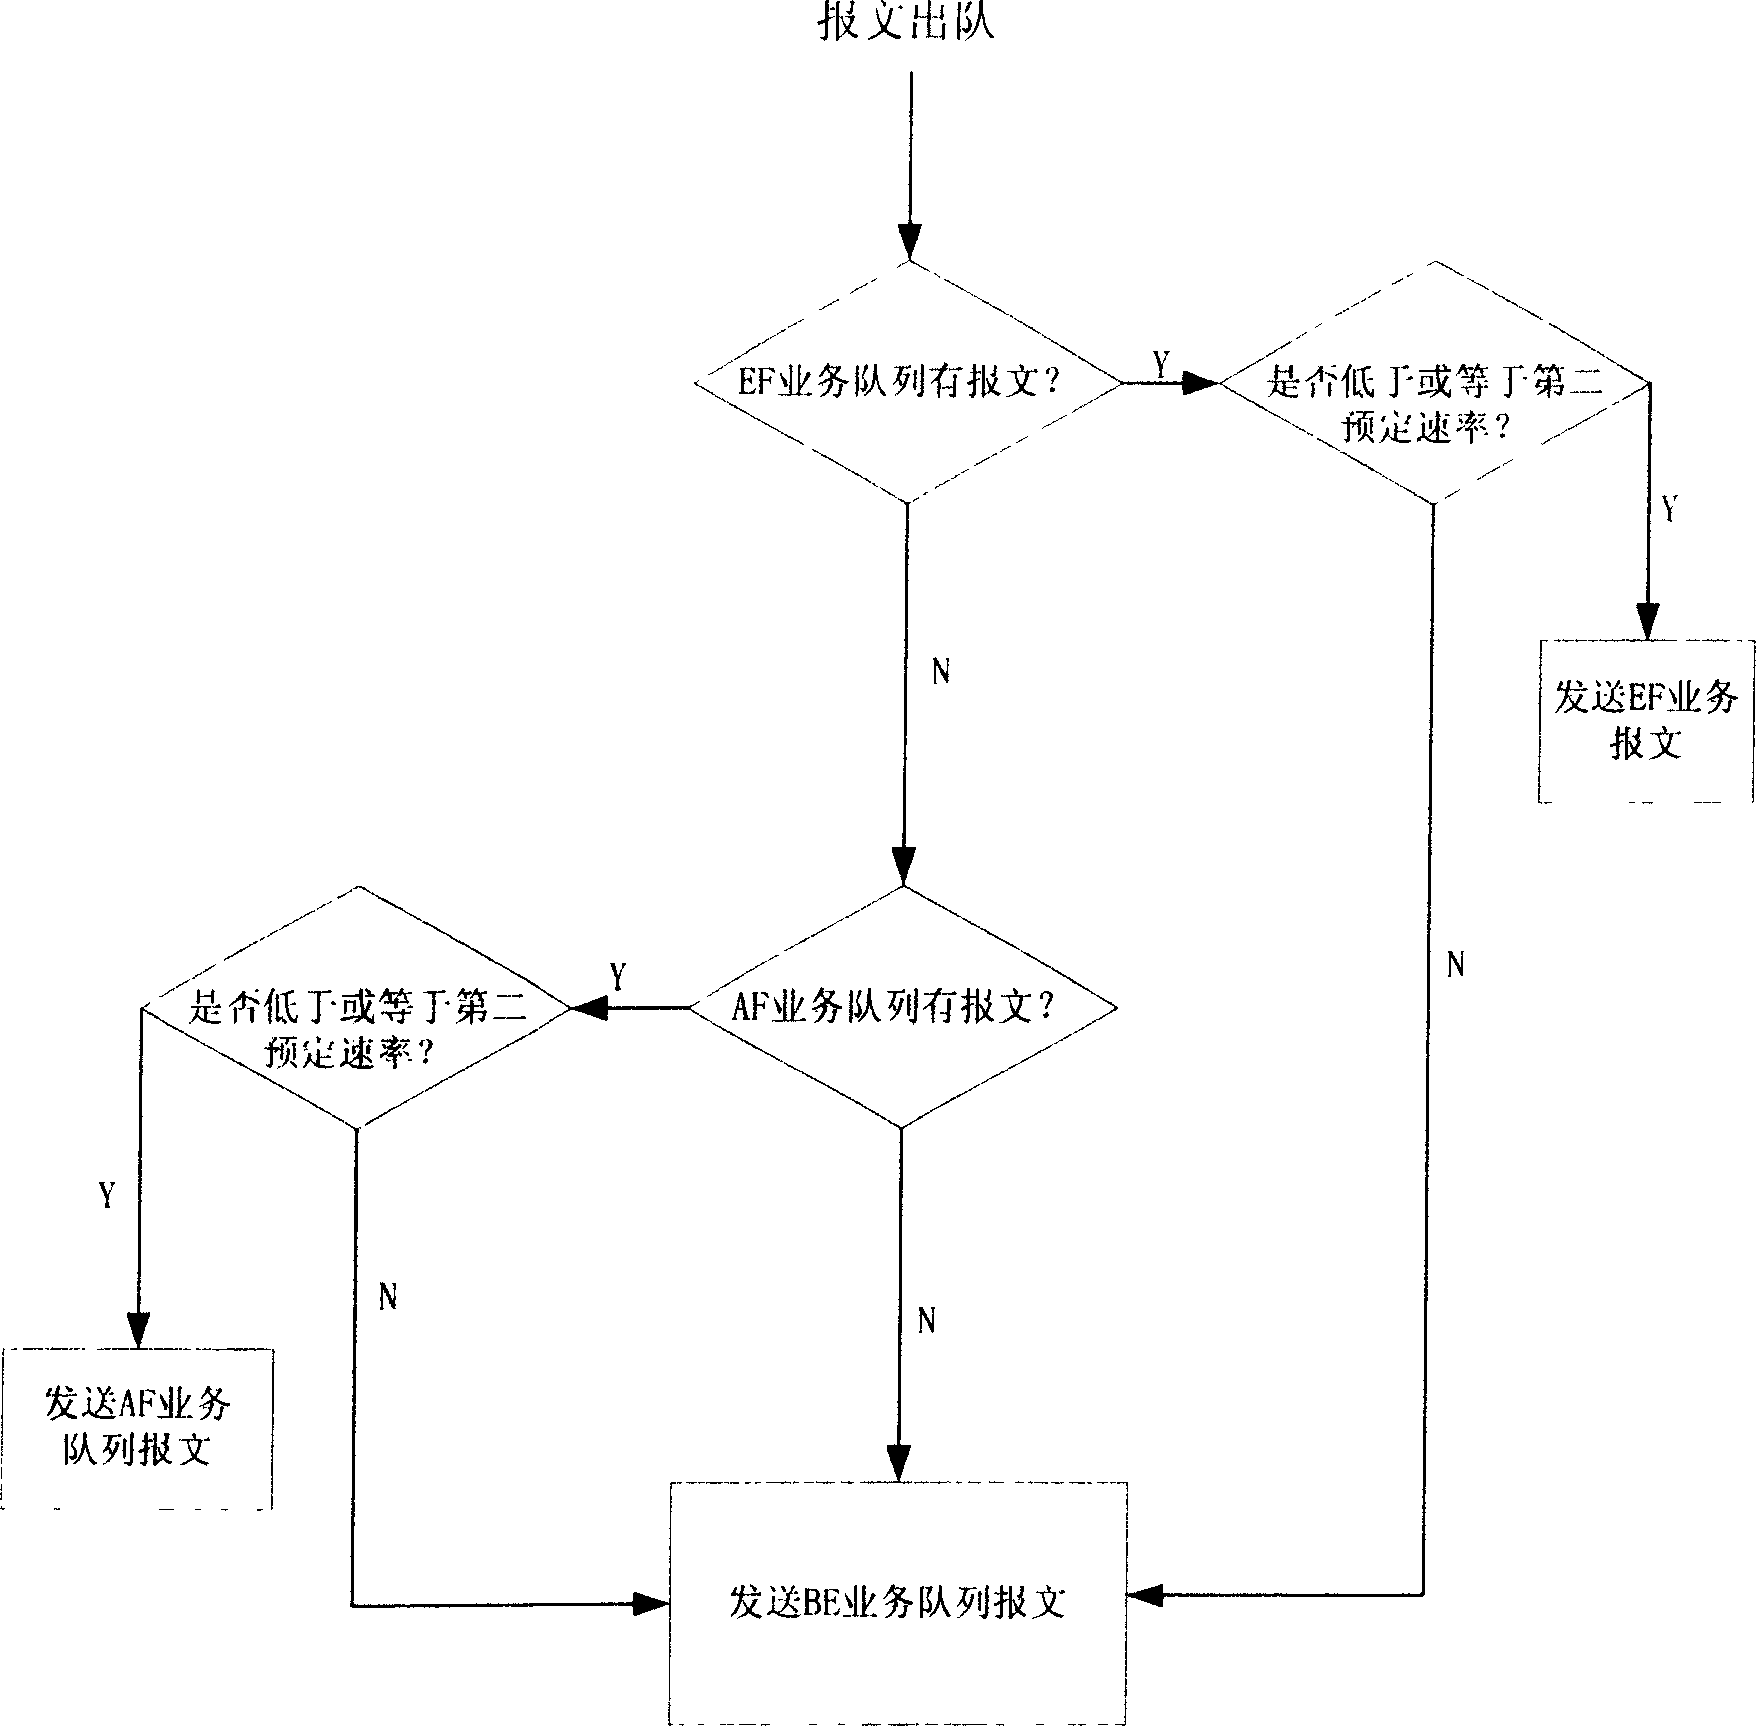 Method of implementing integrated queue scheduling for supporting multi service